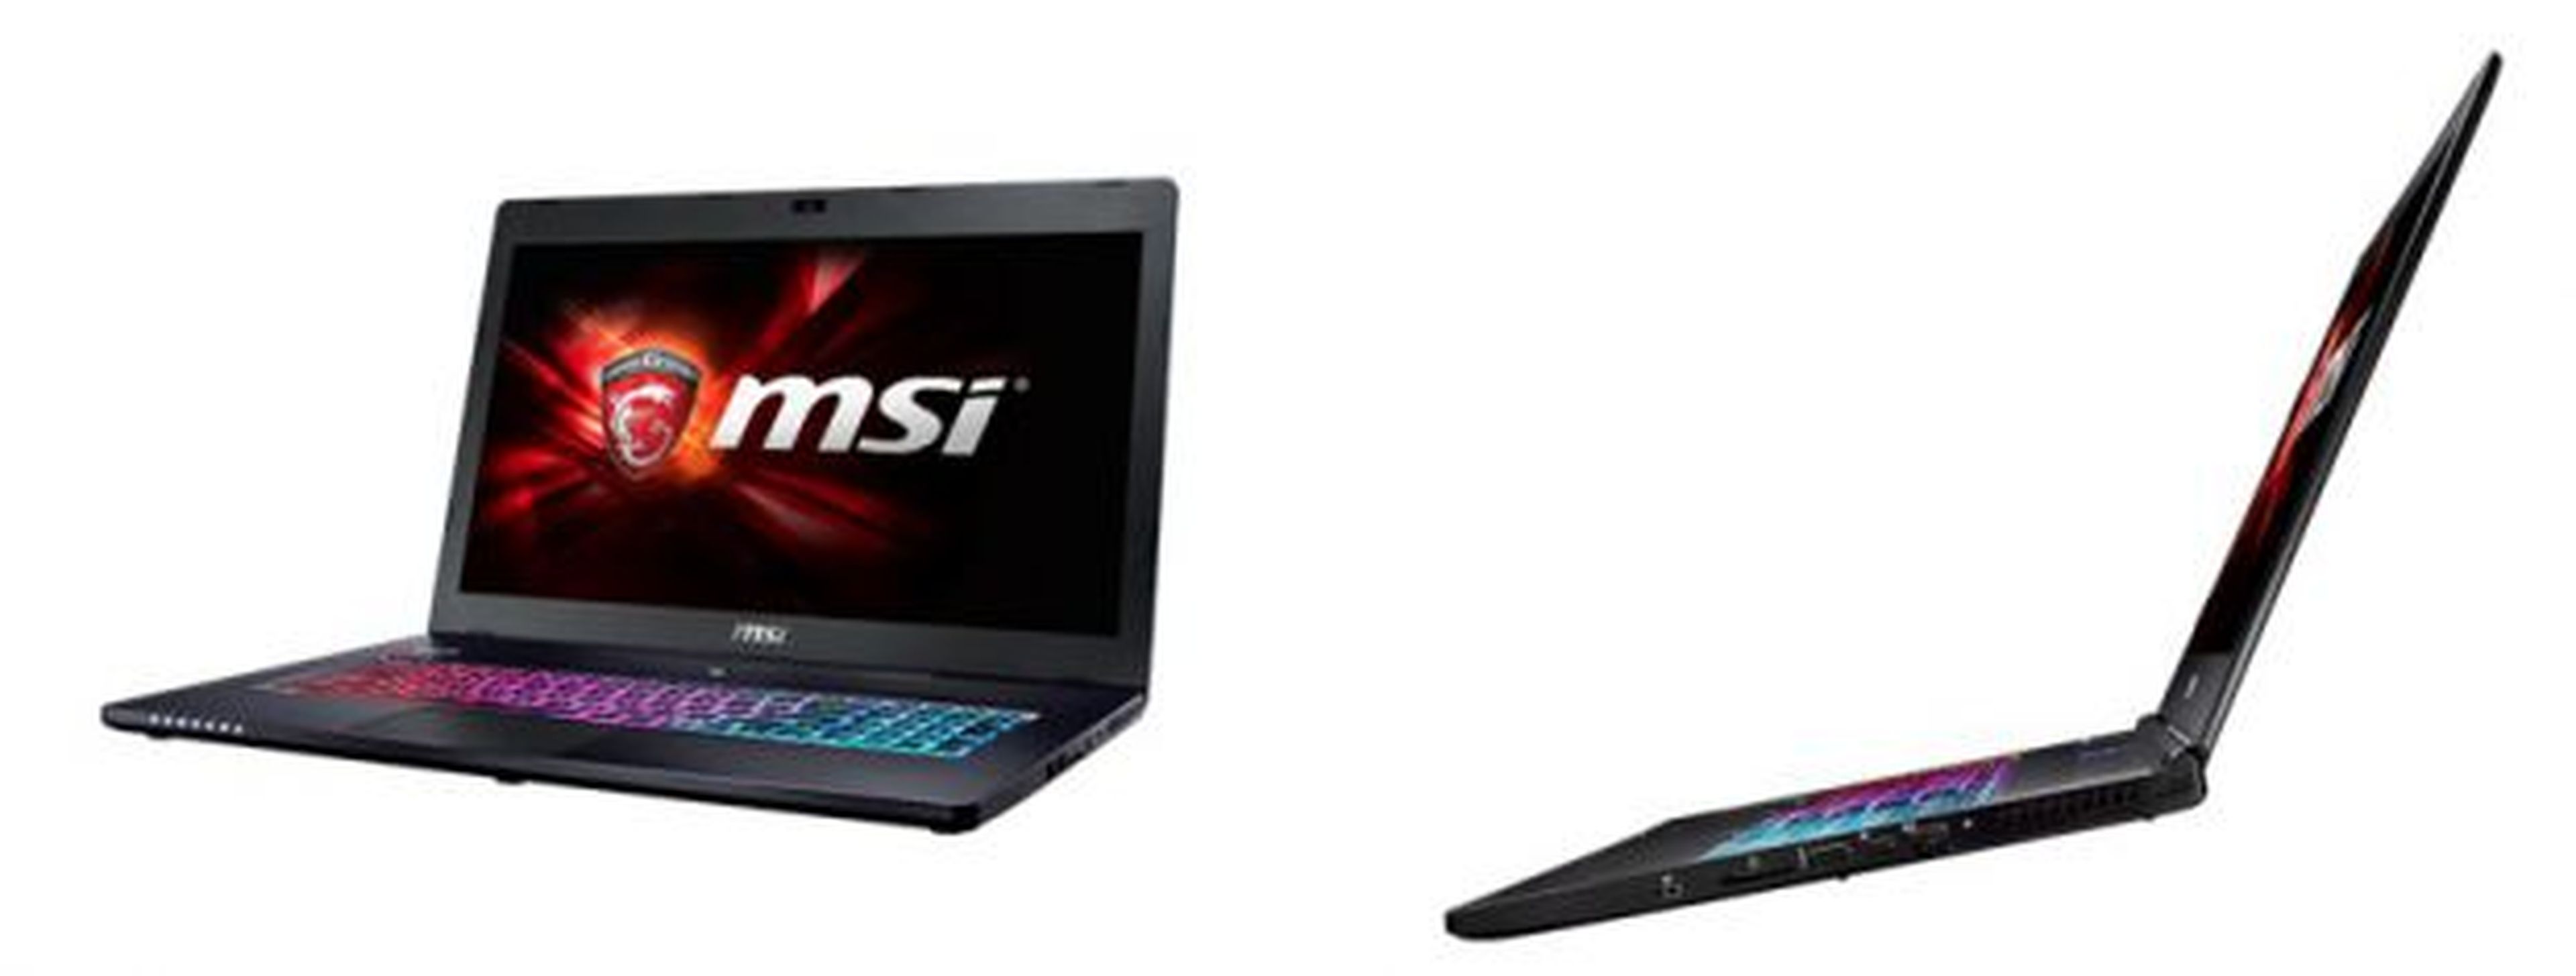 MSI GS70 Stealth/GS60 Ghost